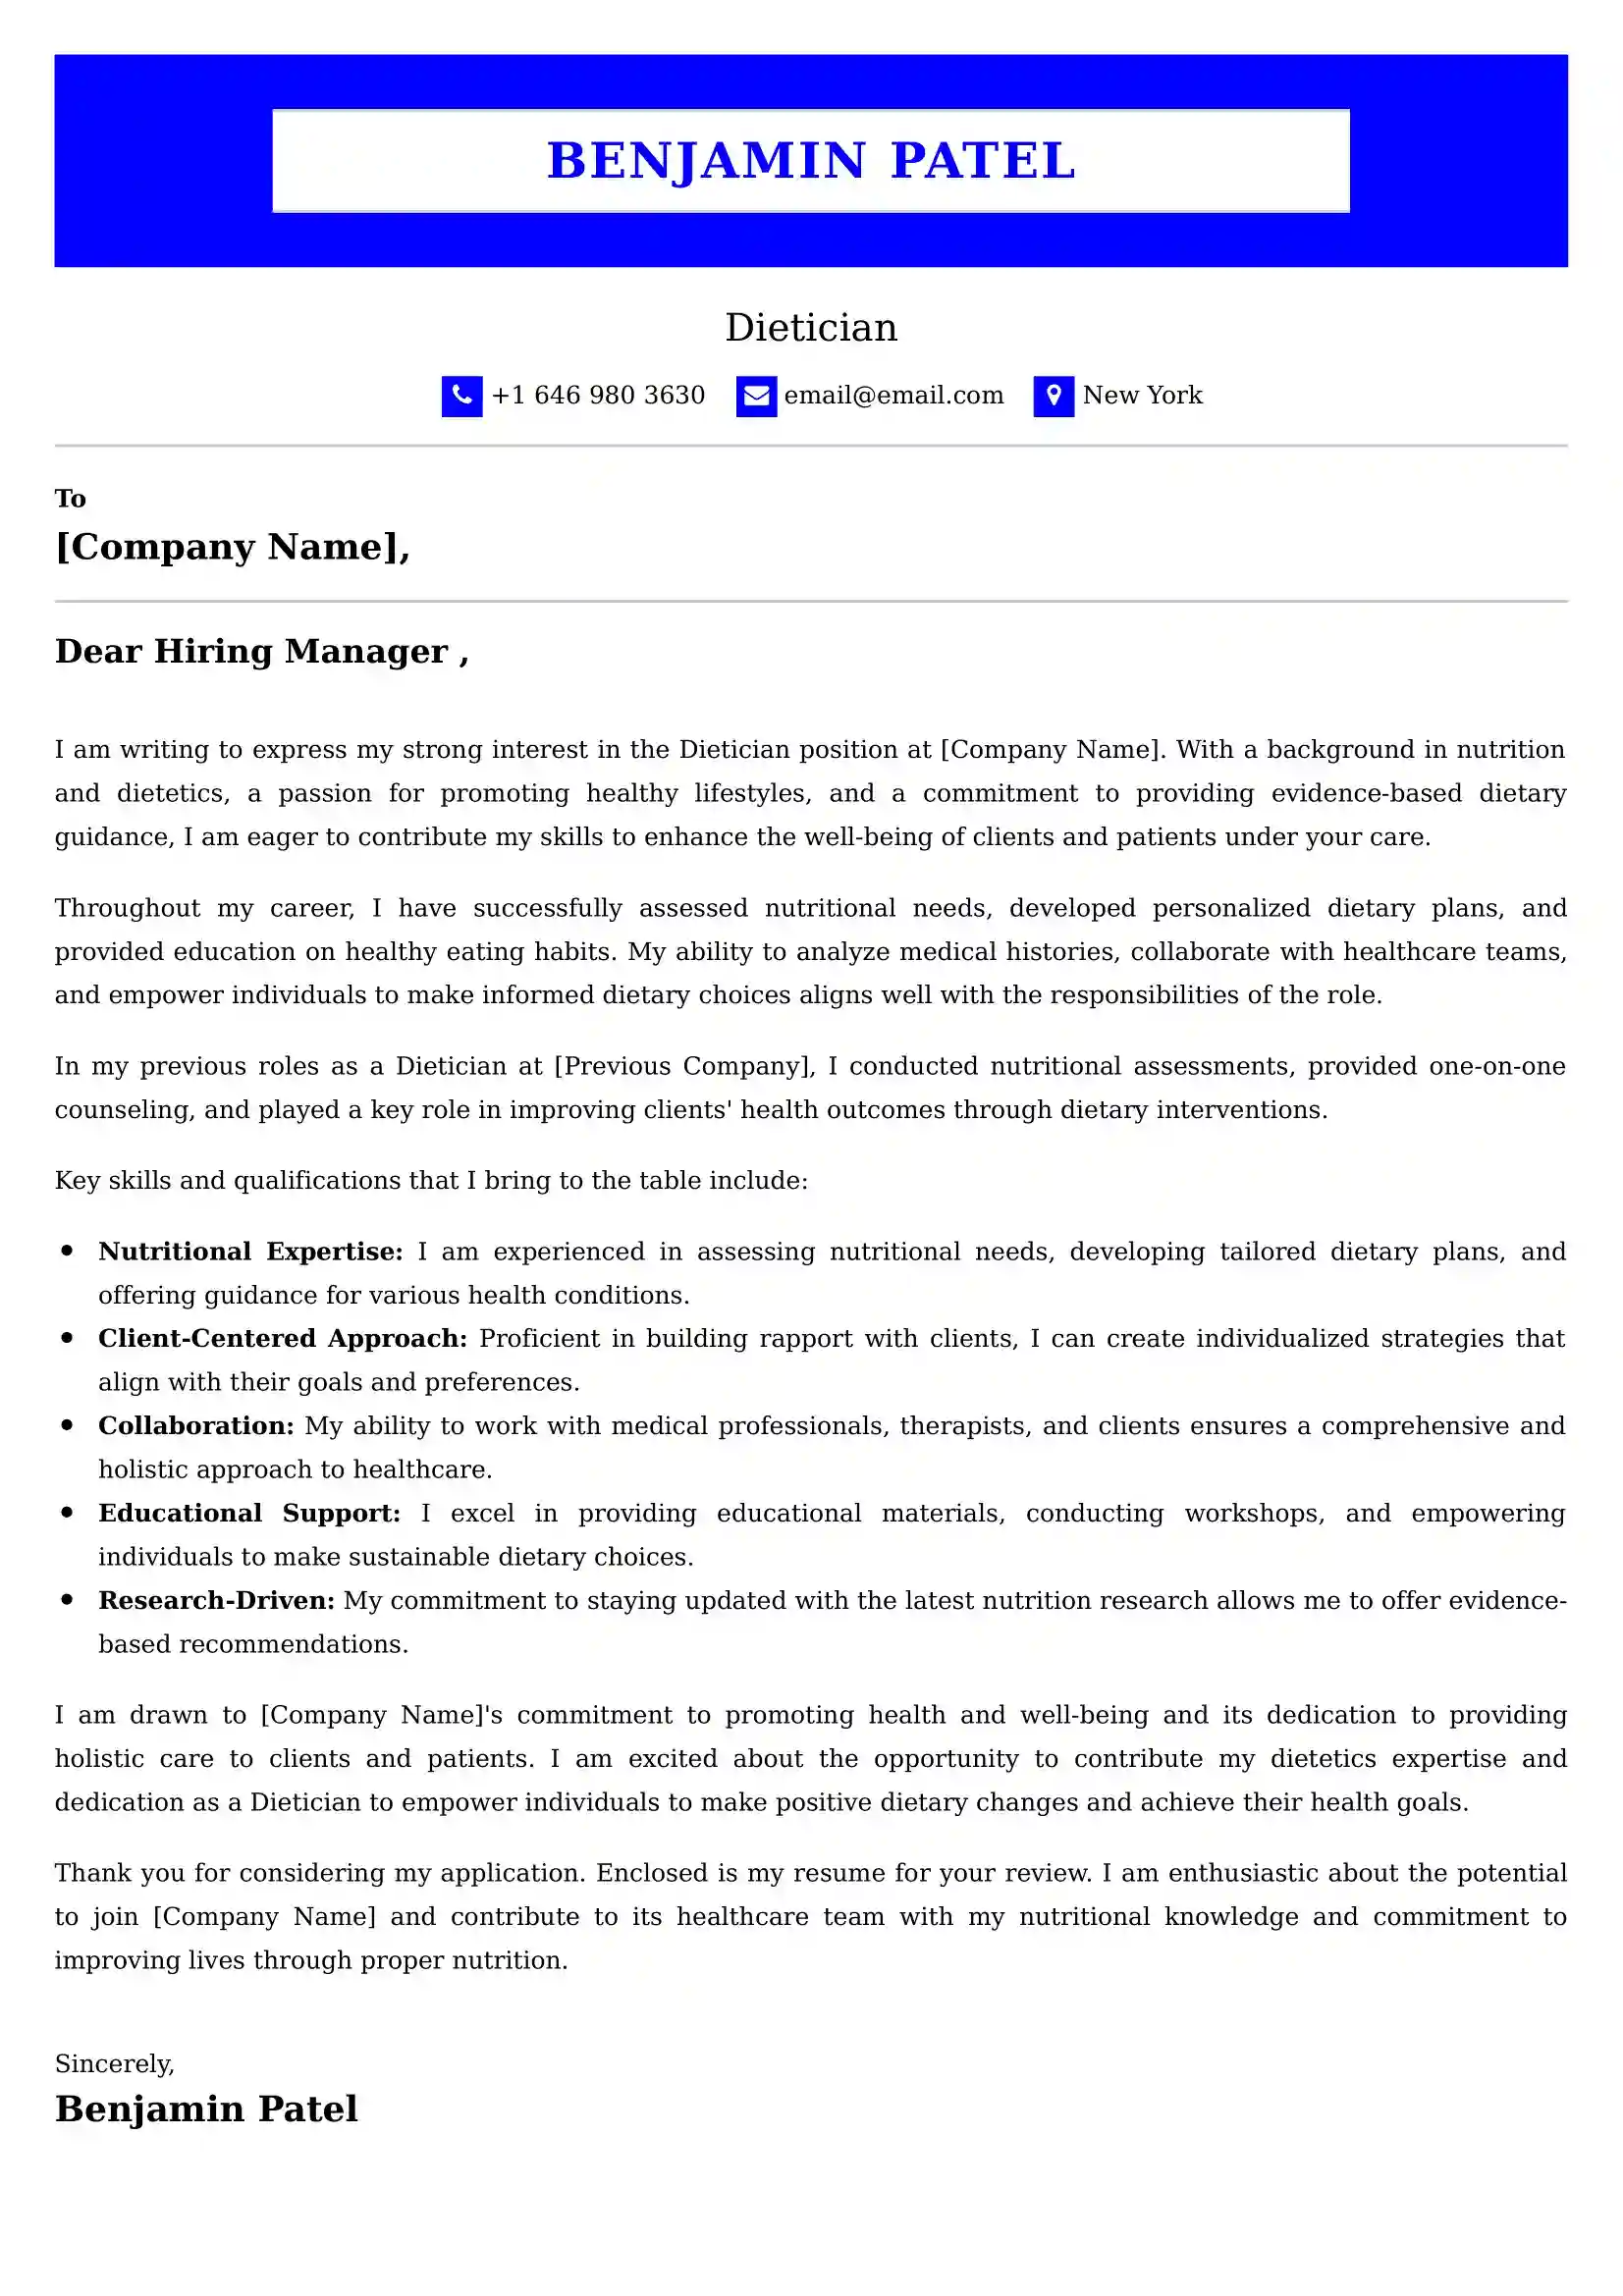 Dietician Cover Letter Examples - Latest UK Format